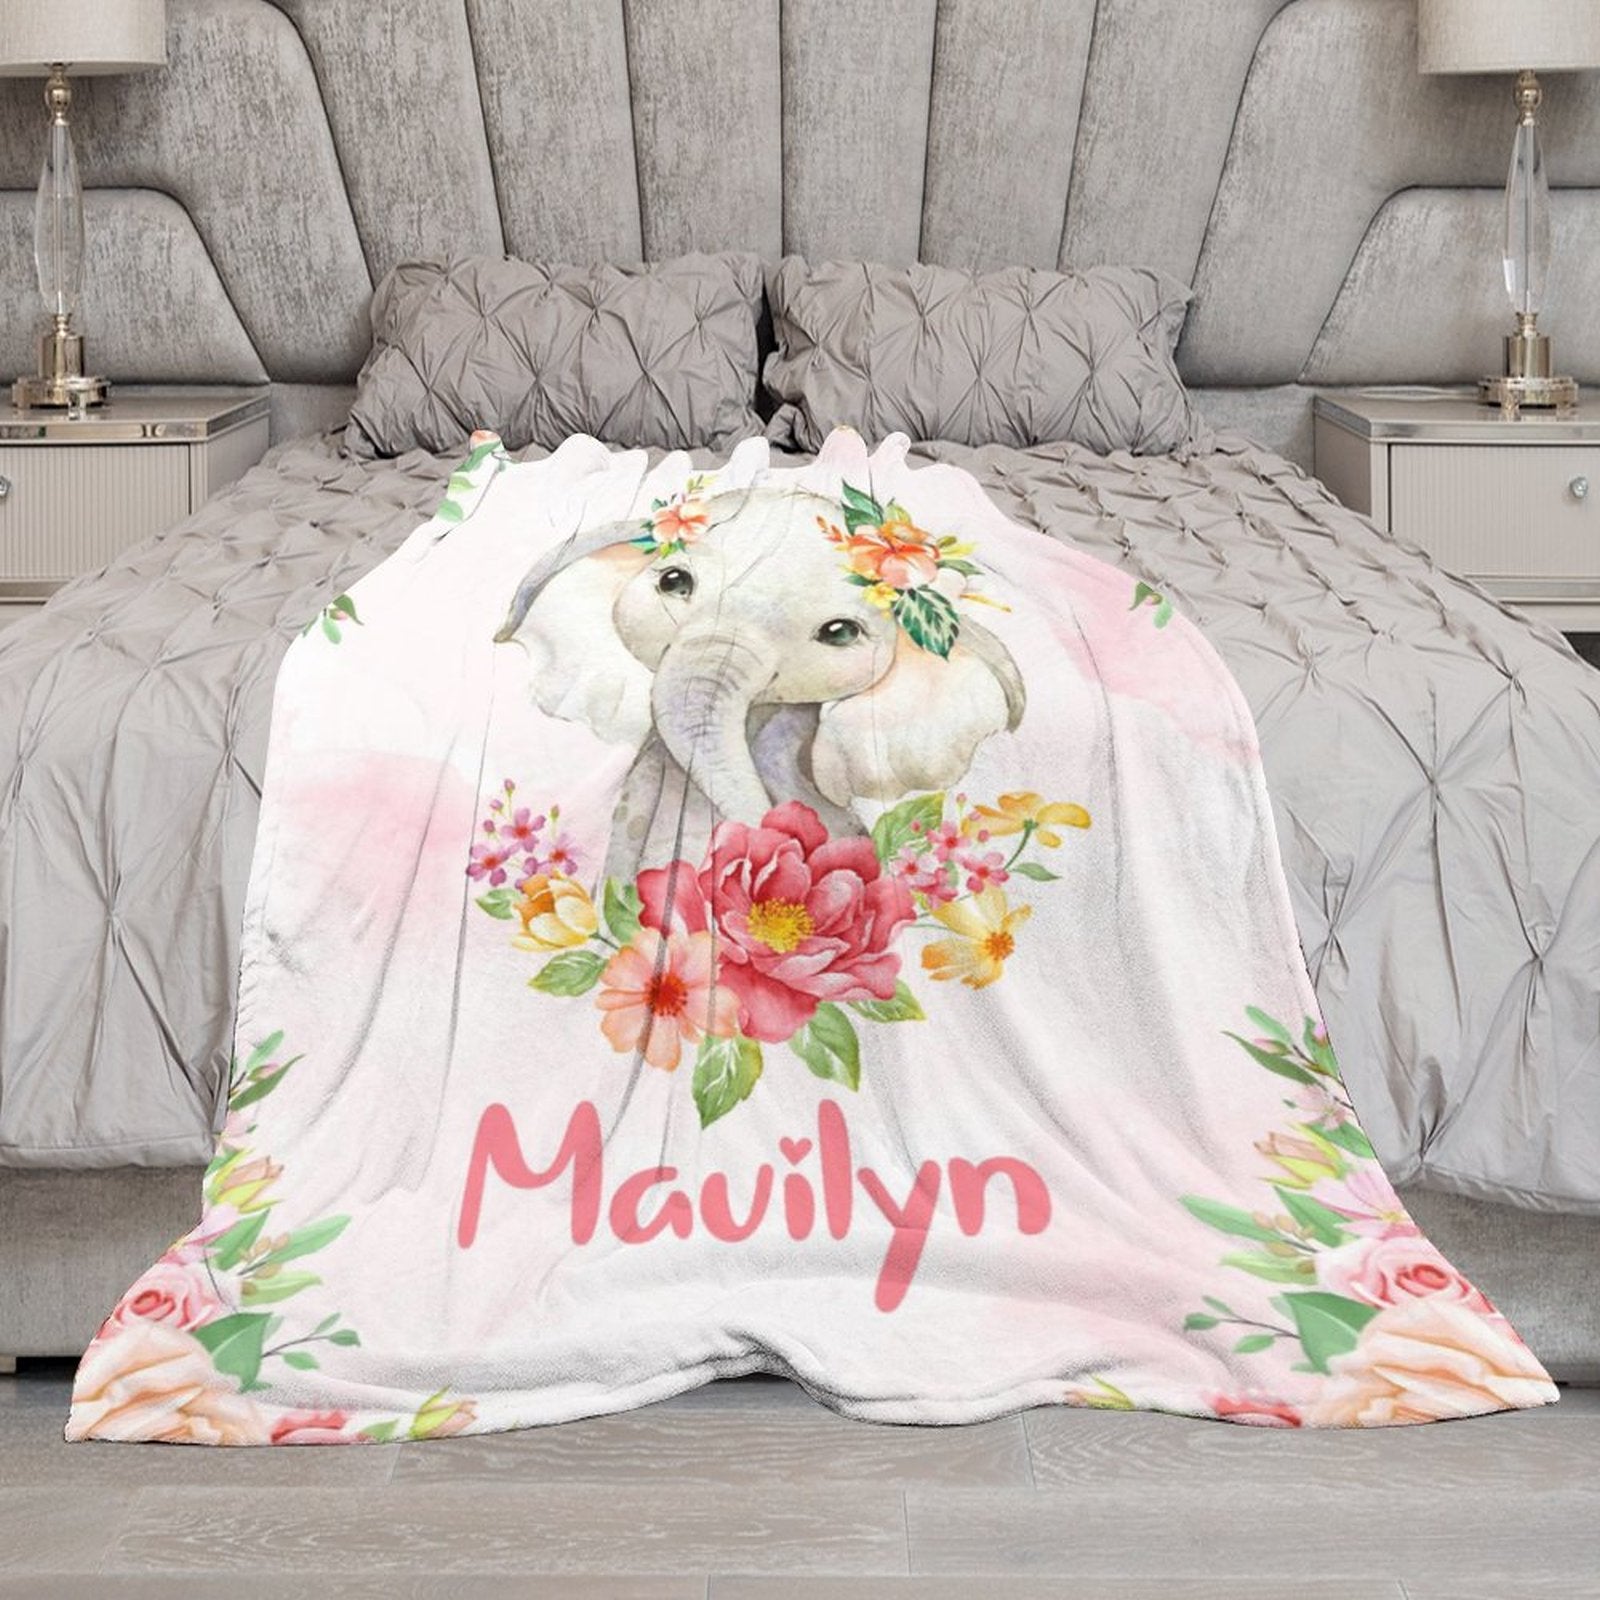 Free Shipping✈️Personalized Baby Blanket with Name Custom - Gifts for Babies - colorfulcustom